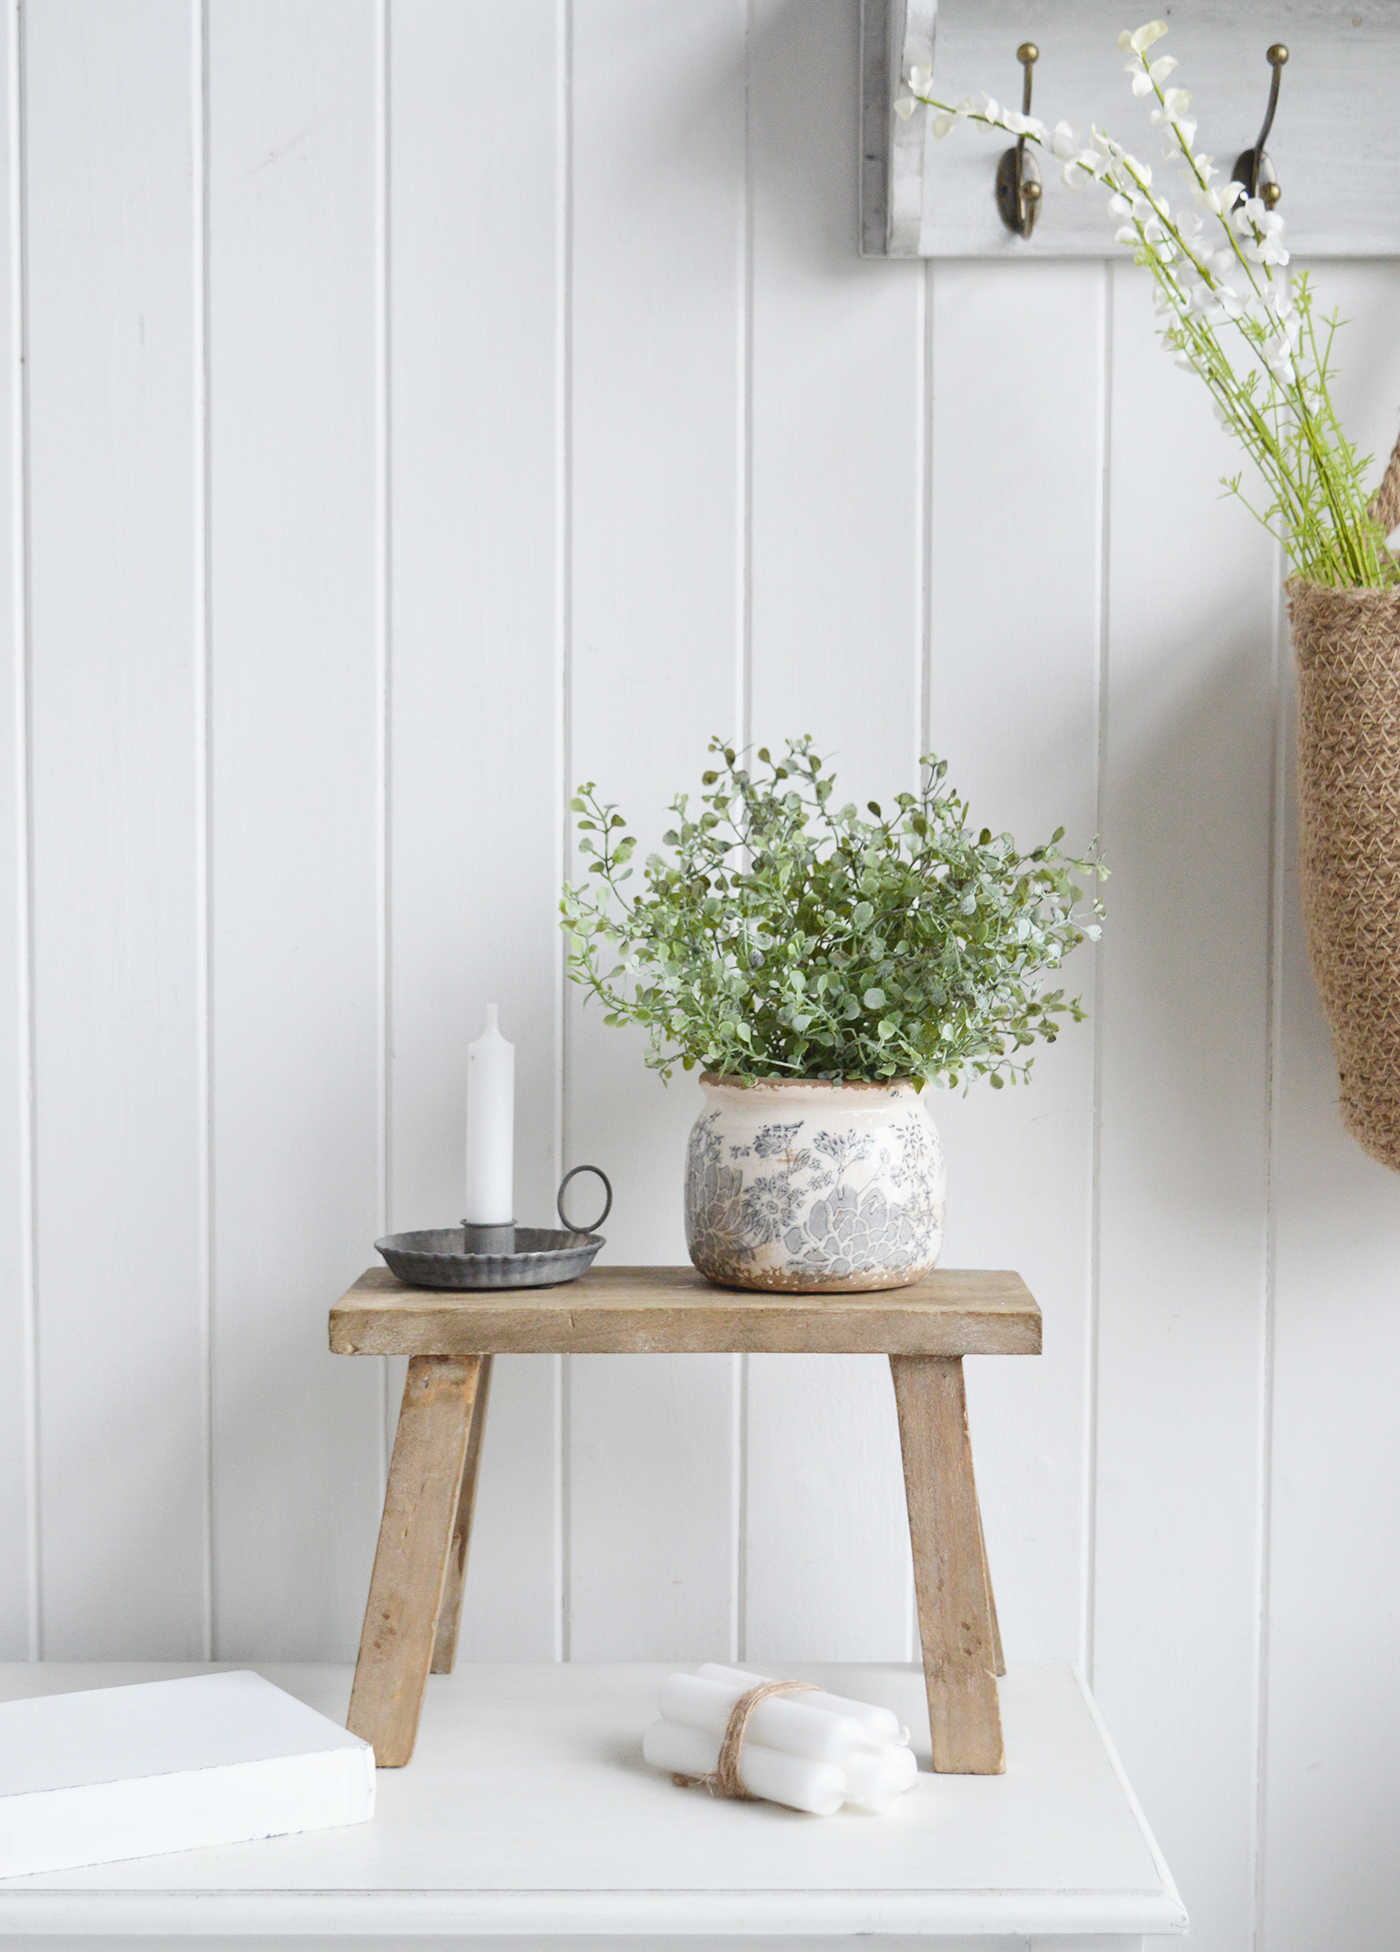 A faux Eucalyptus Gunnii Spray

A perfect faux spray with delicate rounded leaves to add a touch of greenery to your space